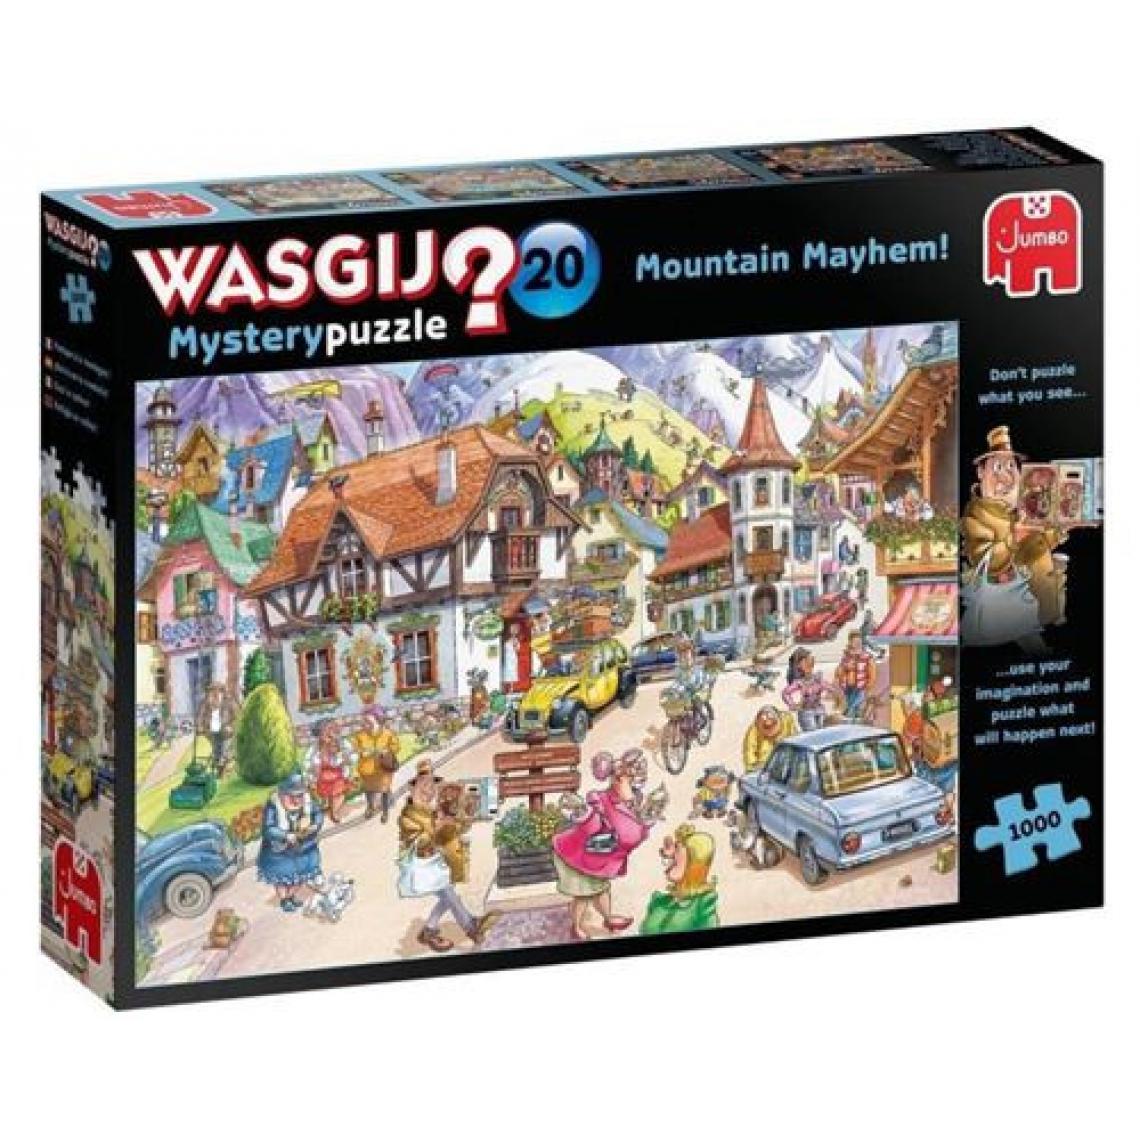 Diset - Puzzle 1000 pièces Diset Wasgij Mystery 20 Mountain Mayhem ! - Animaux